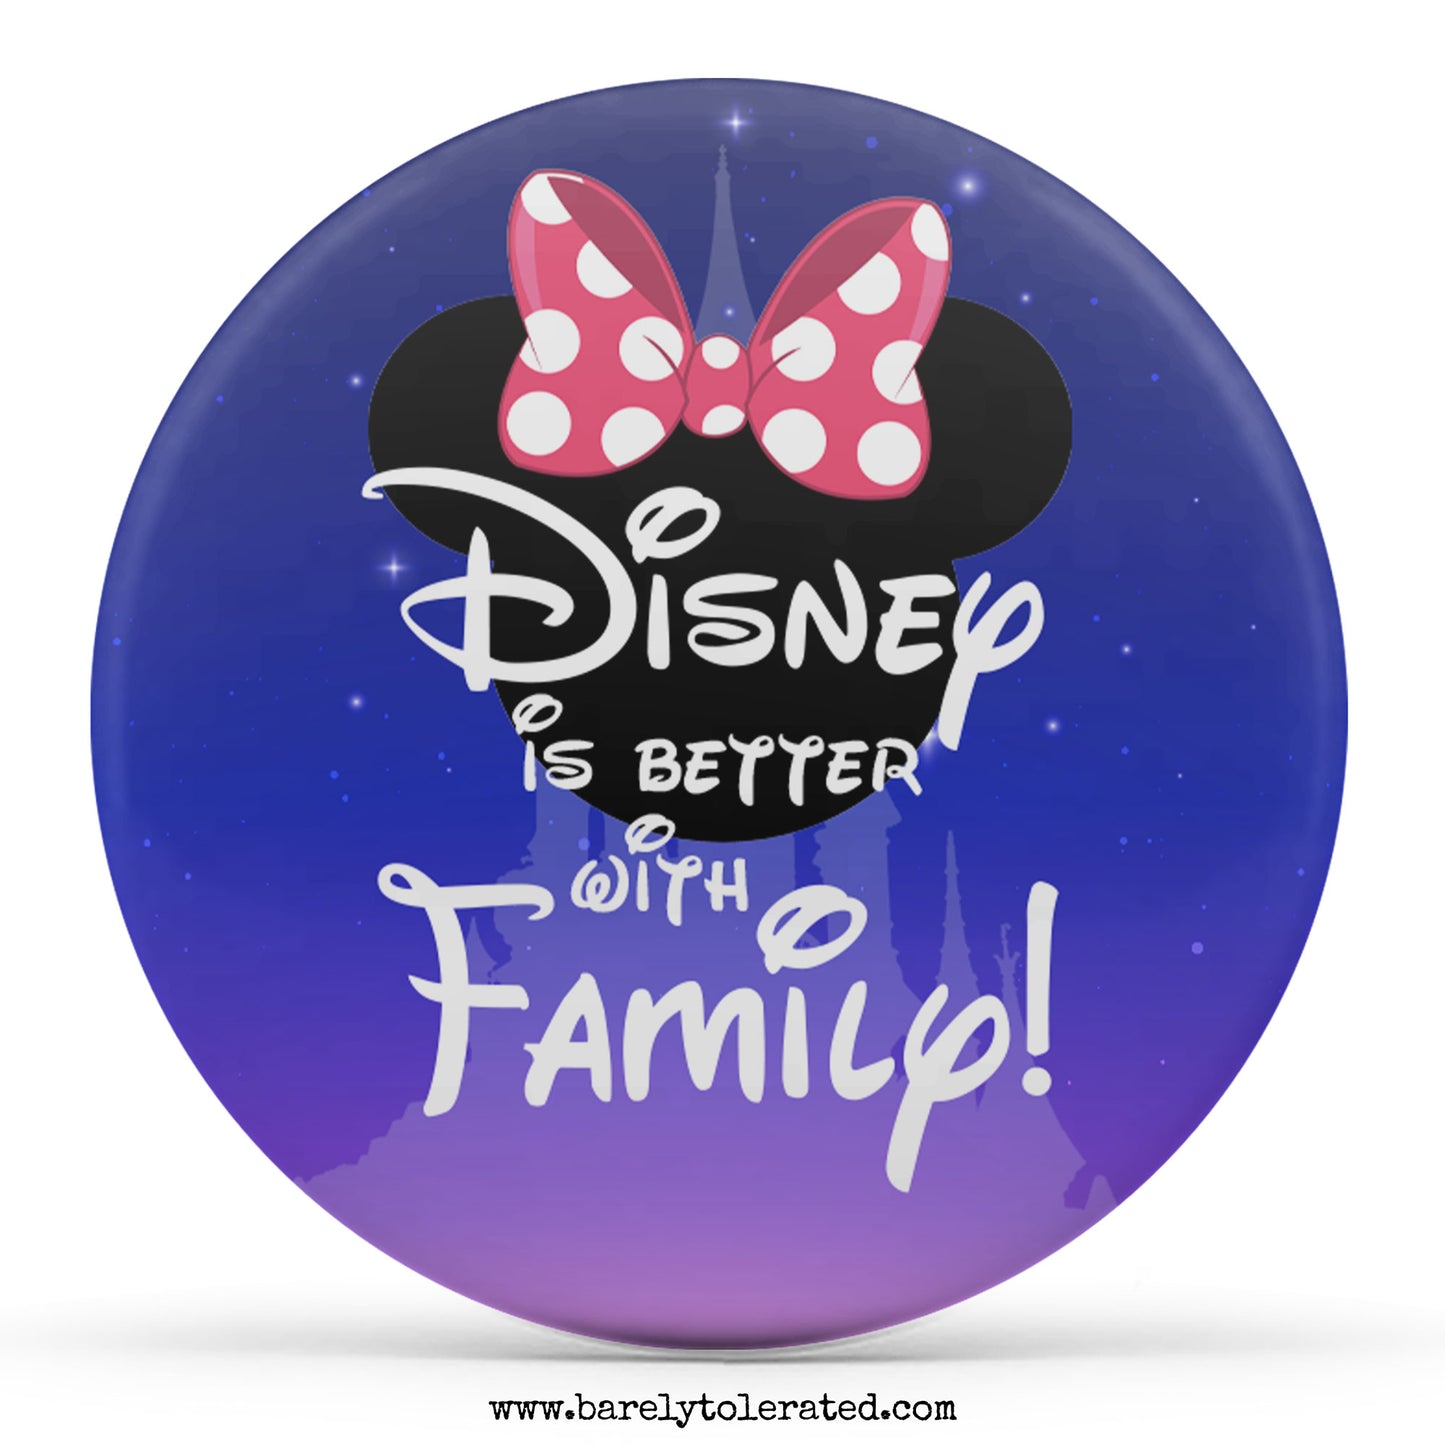 Disney is Better with Family - Girl Mouse